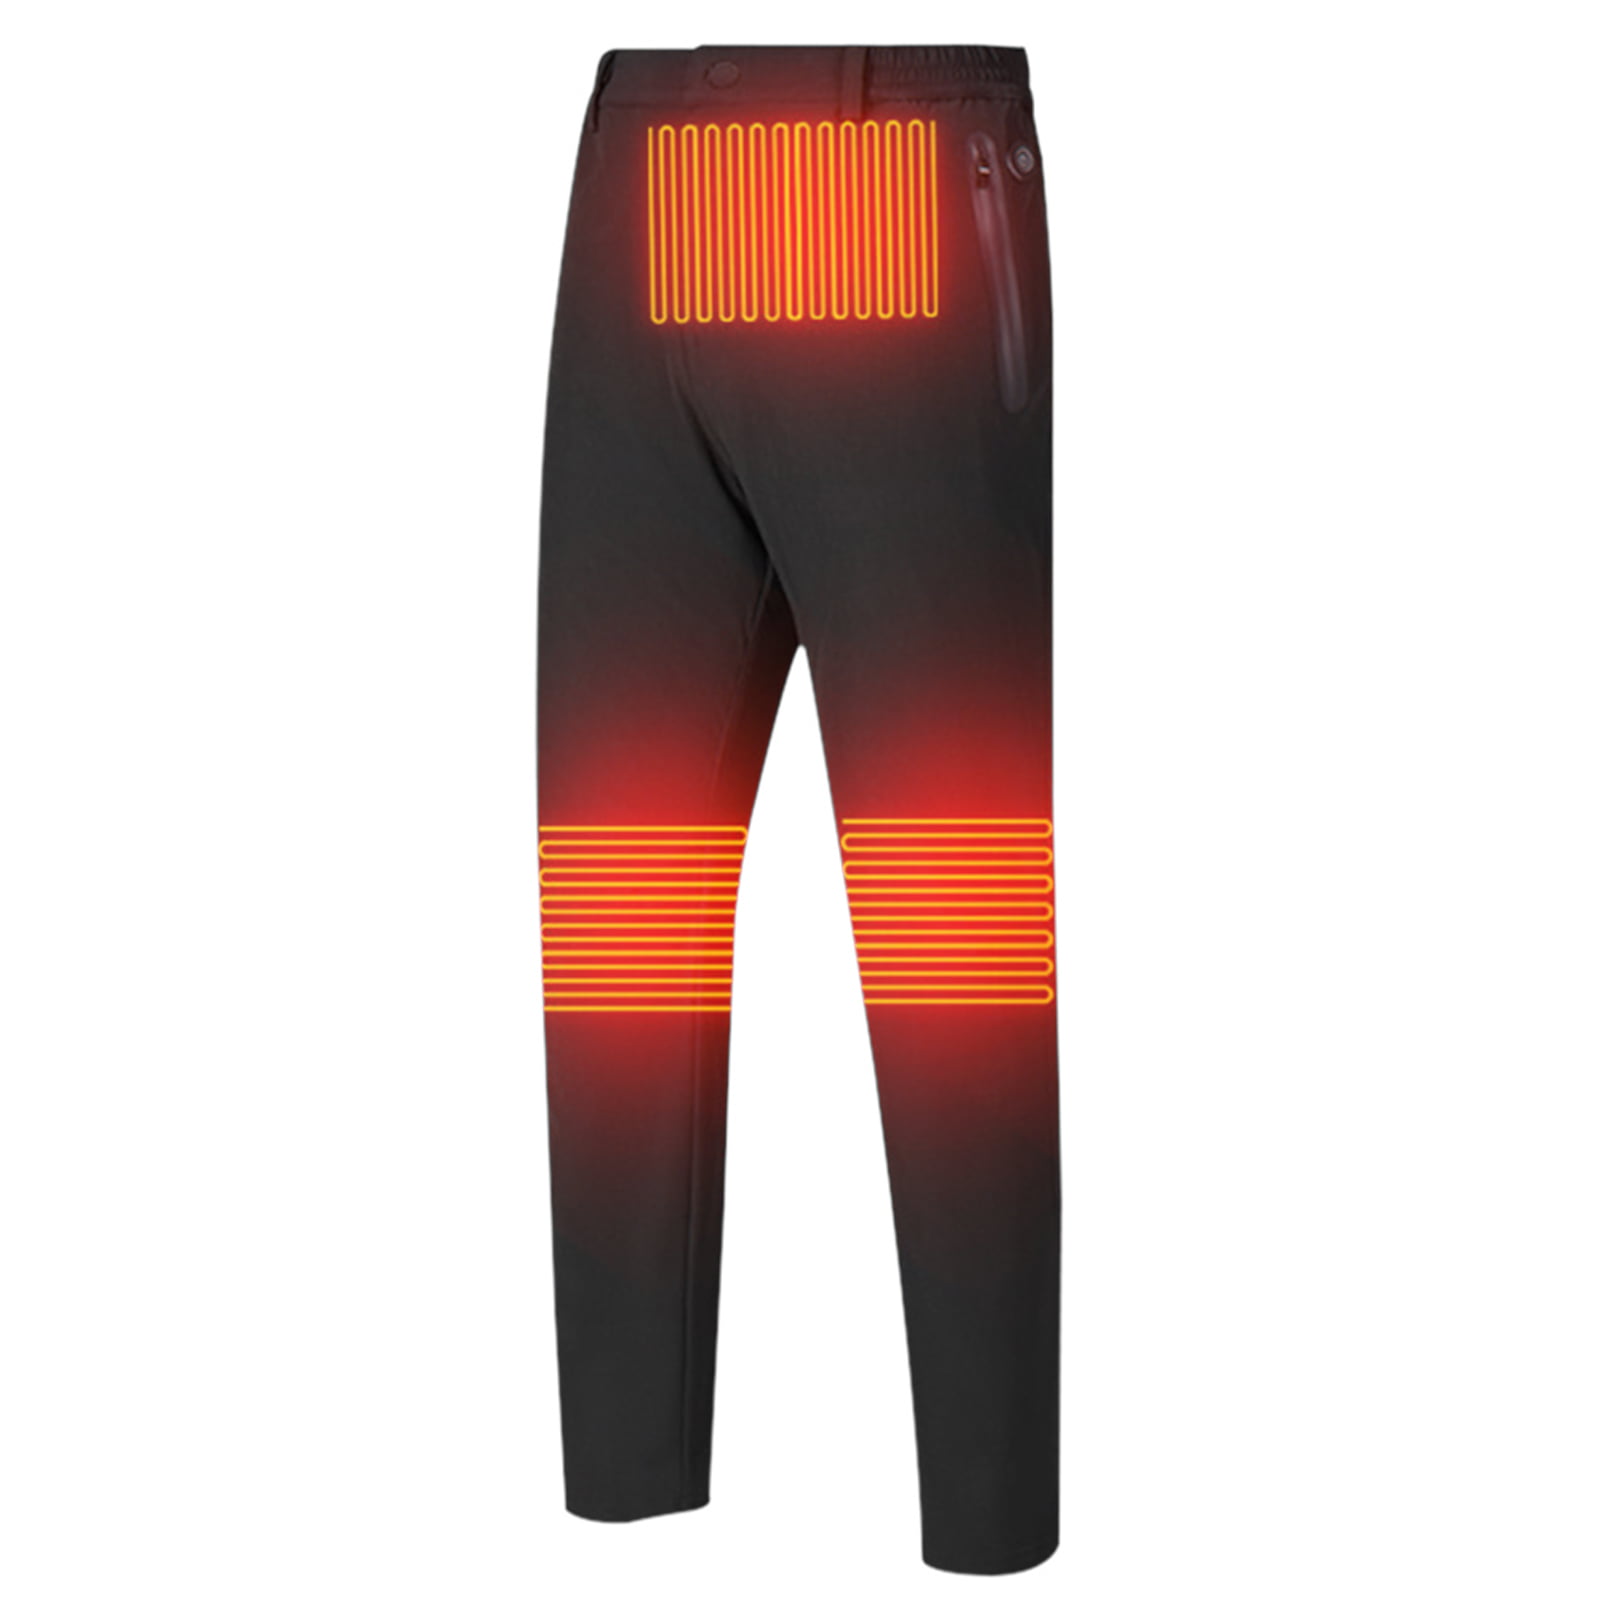 USB Heated Pants Men Electric Heating Trousers Warm Knees Winter Outdoor Cycling 